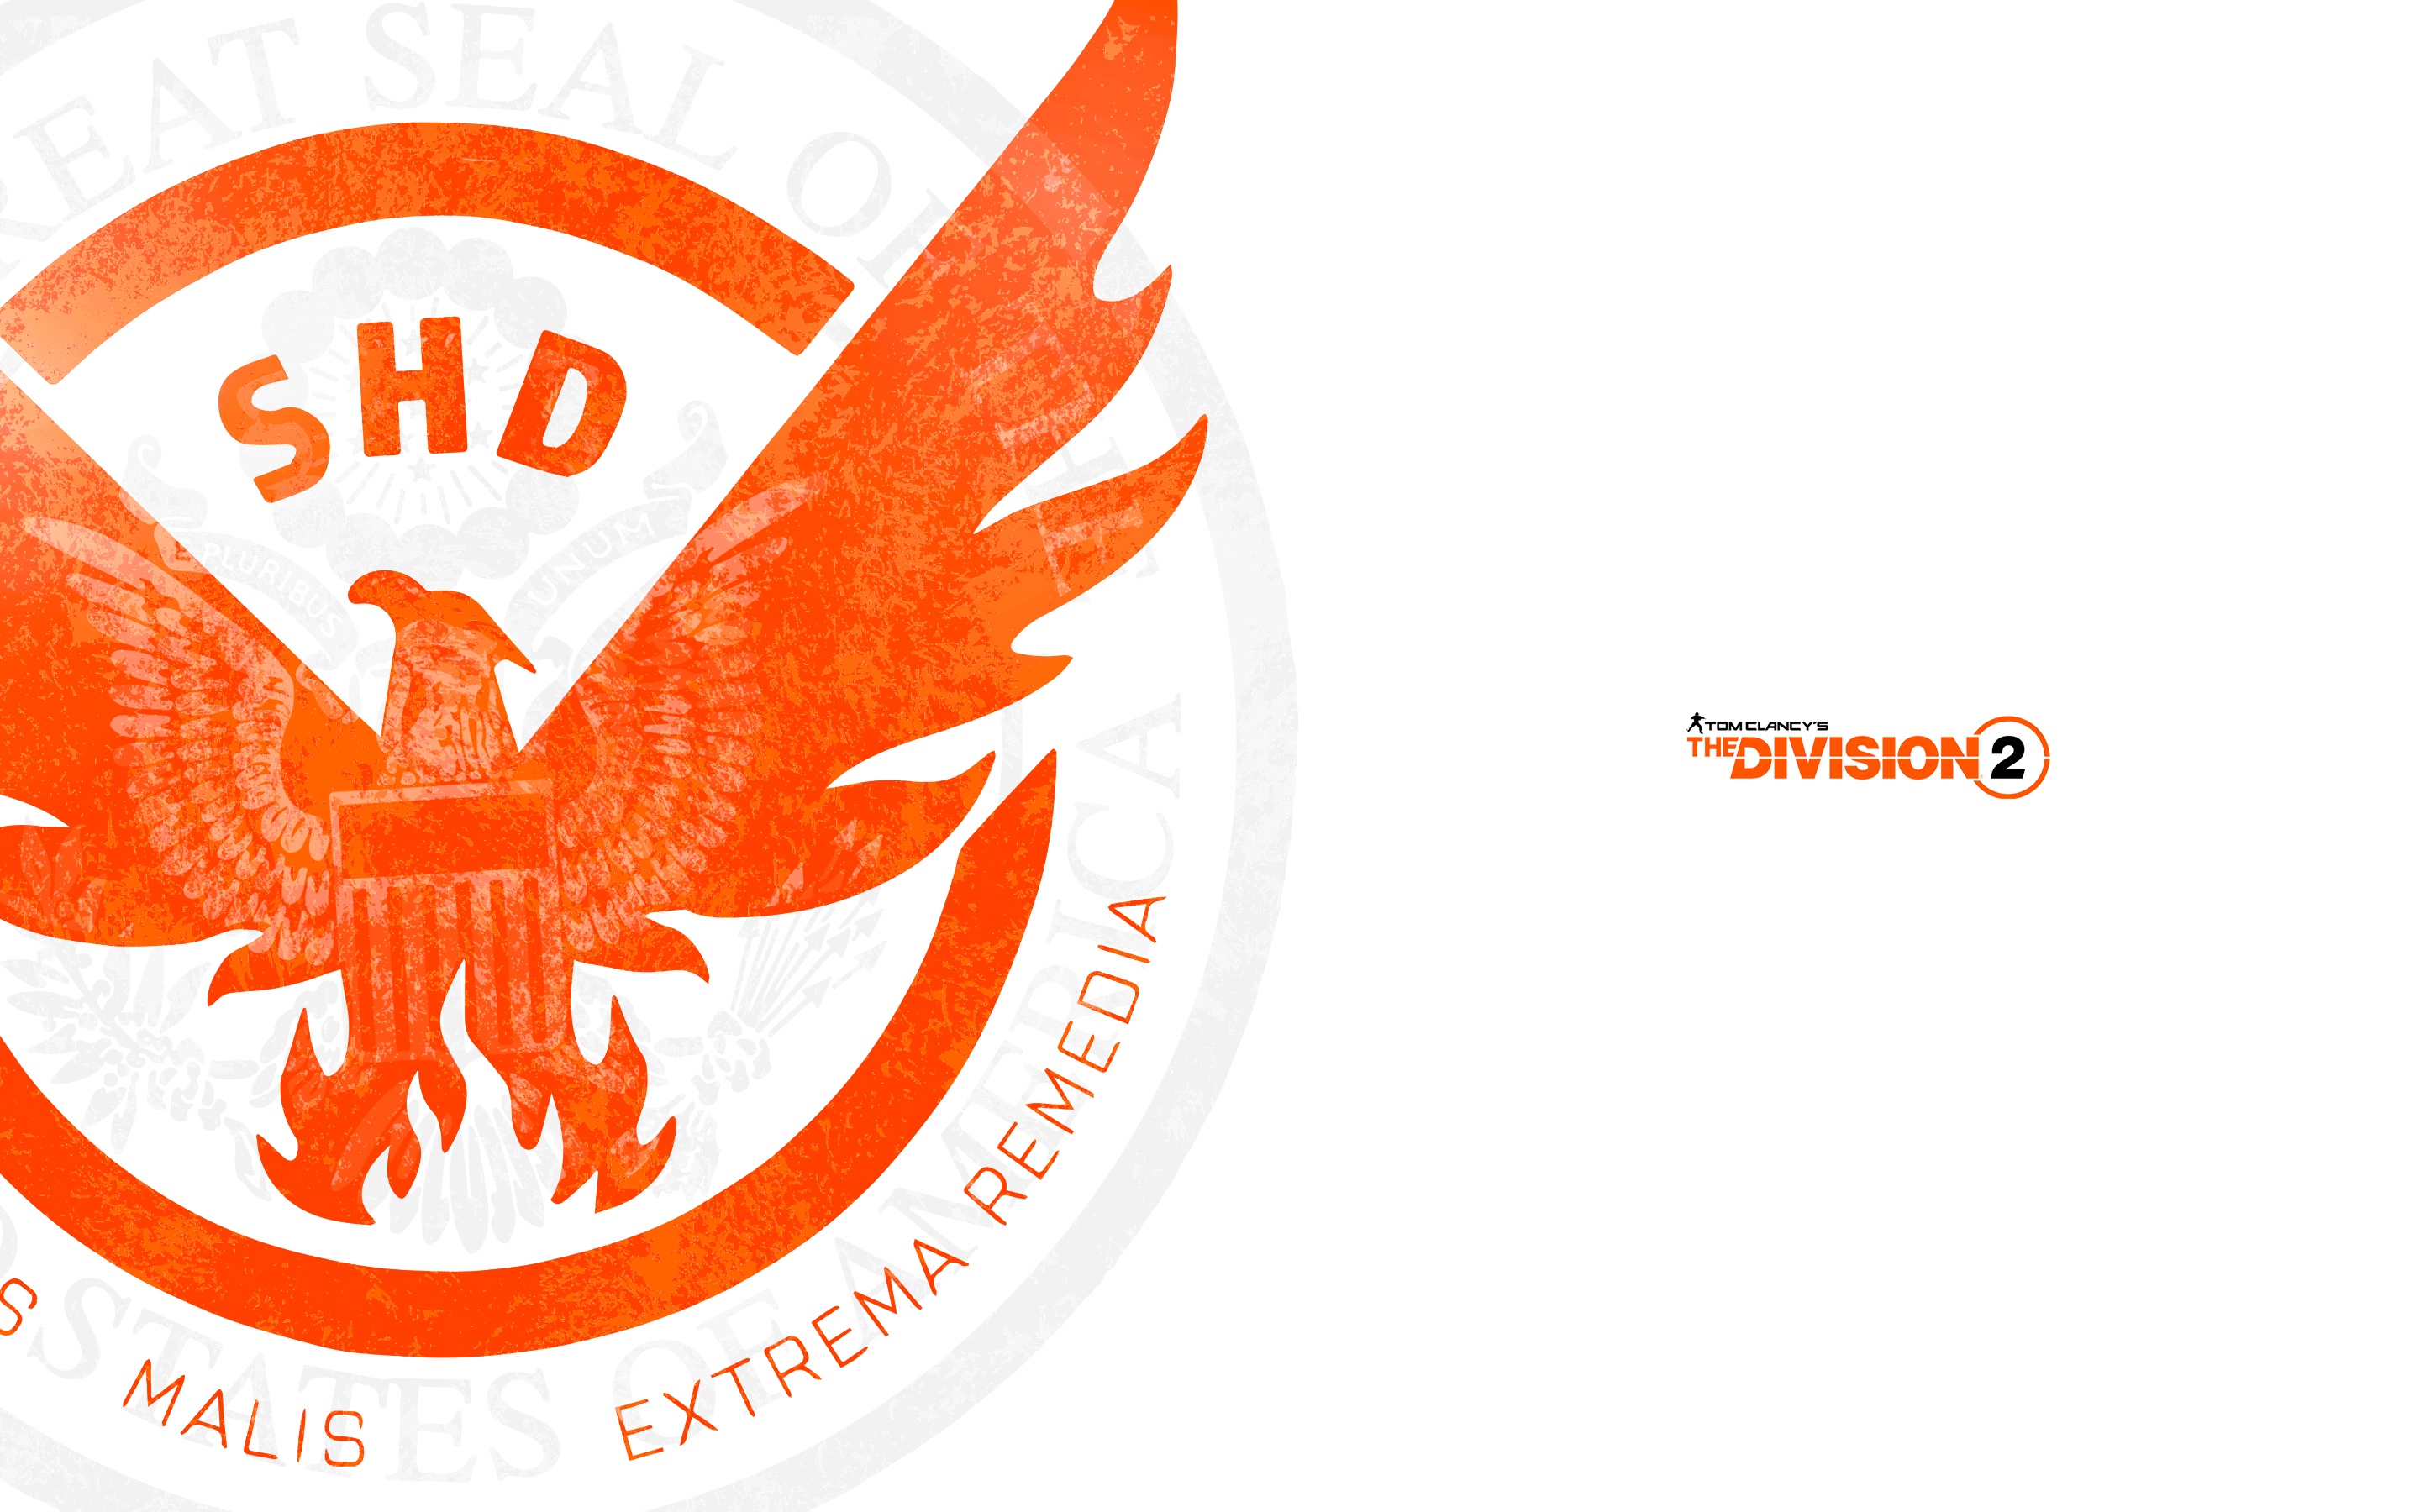 The Division 2 Wallpapers Desktop Mobile Division 2